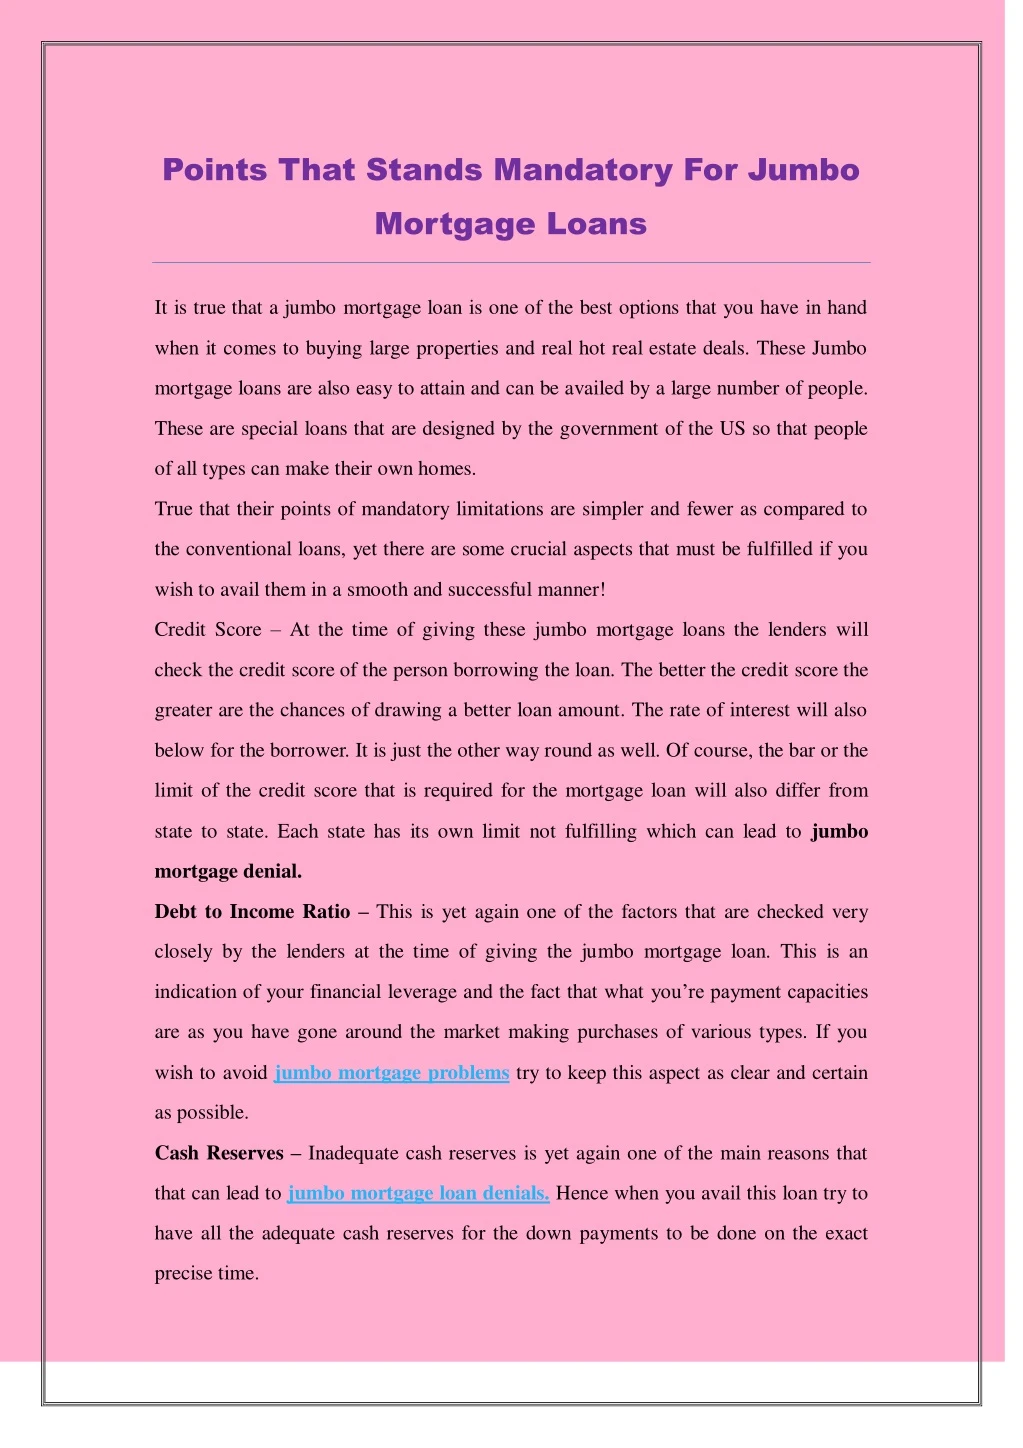 points that stands mandatory for jumbo mortgage